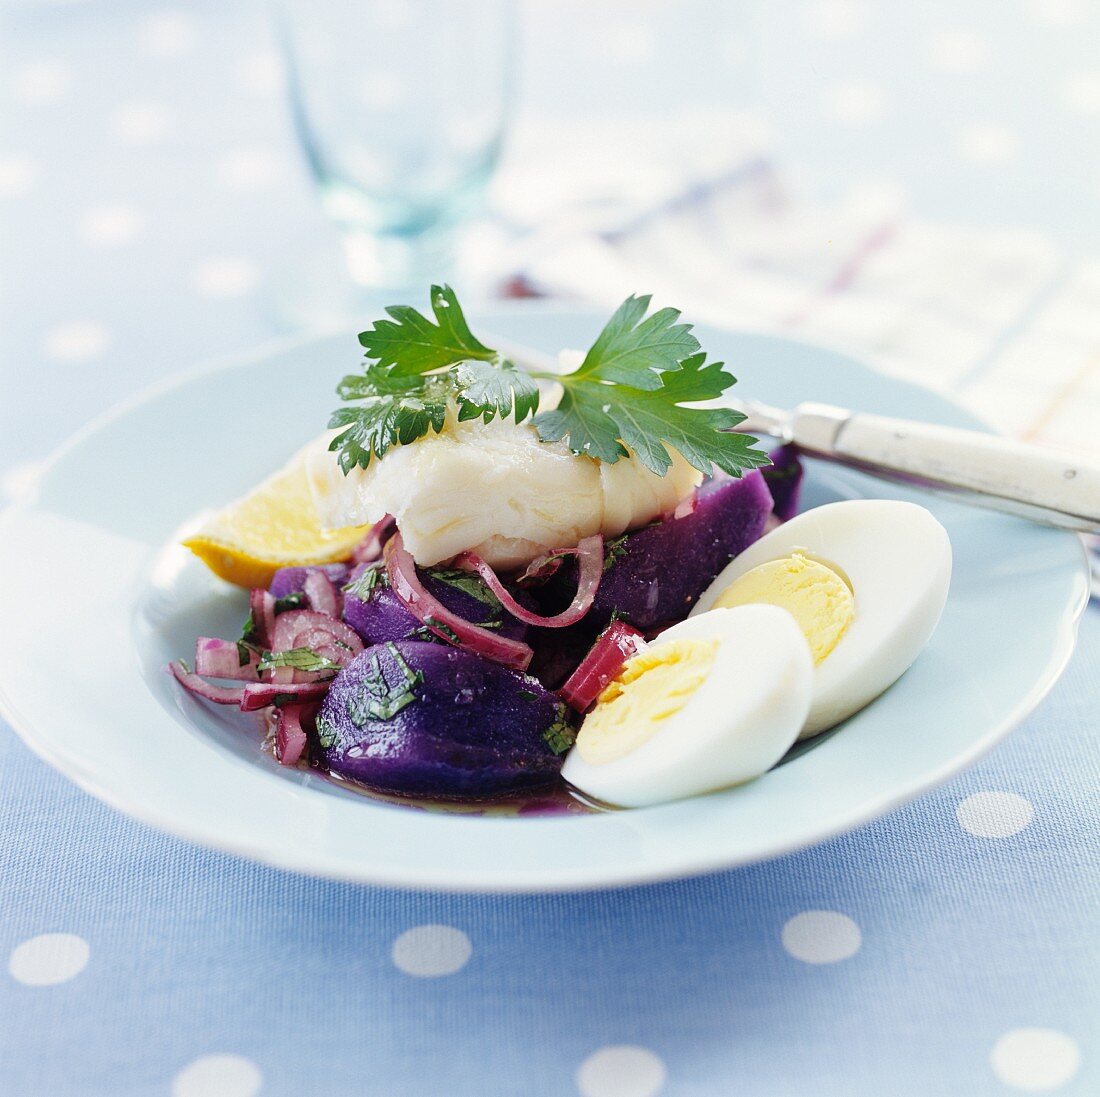 Beetroot salad with fish and egg